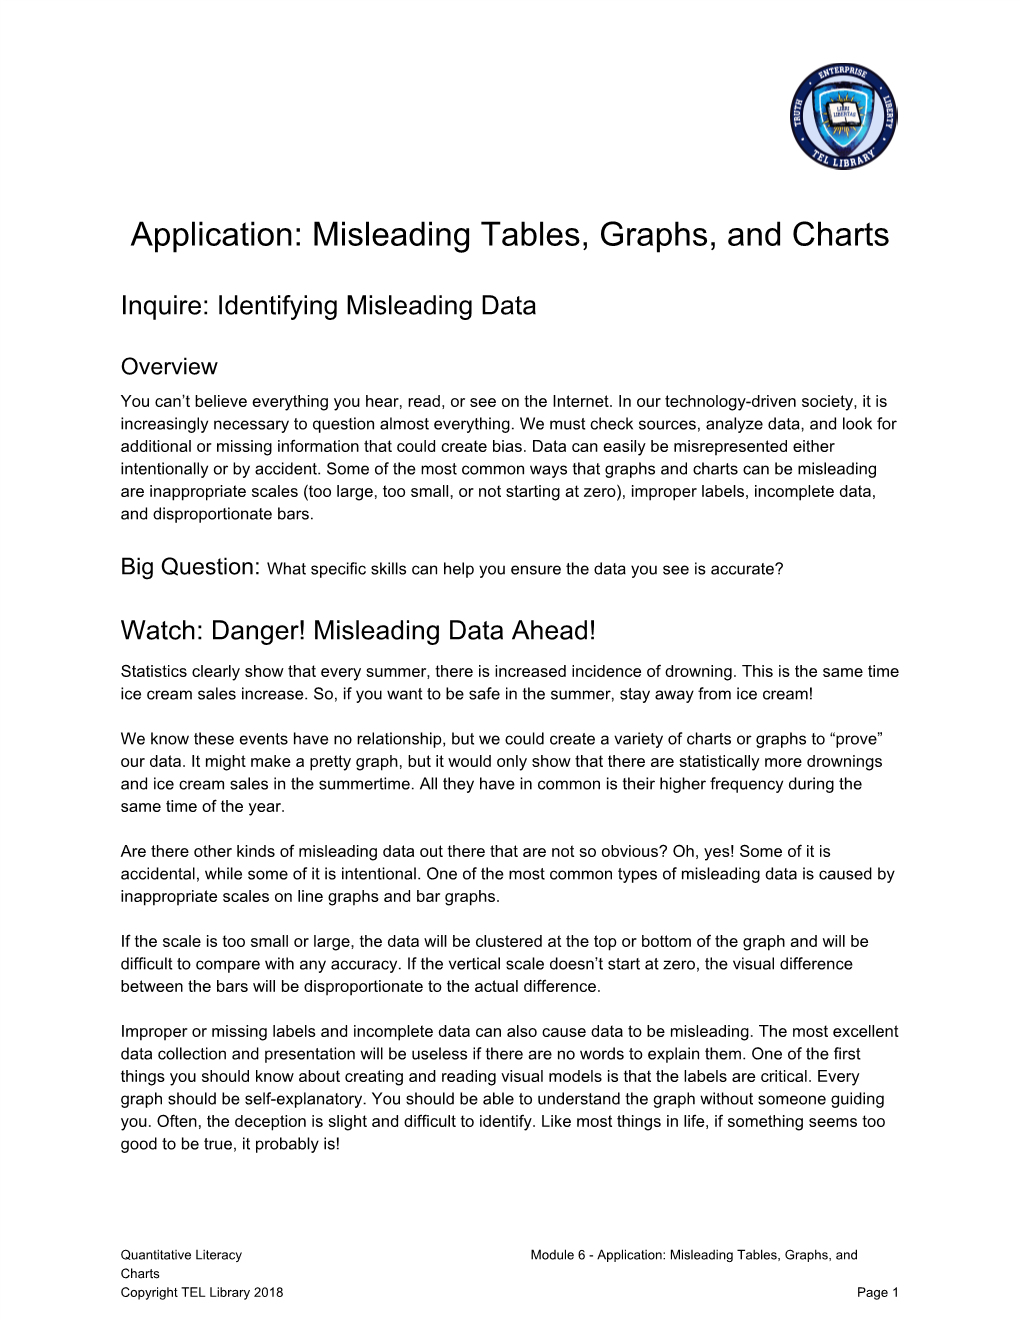 Application: Misleading Tables, Graphs, and Charts